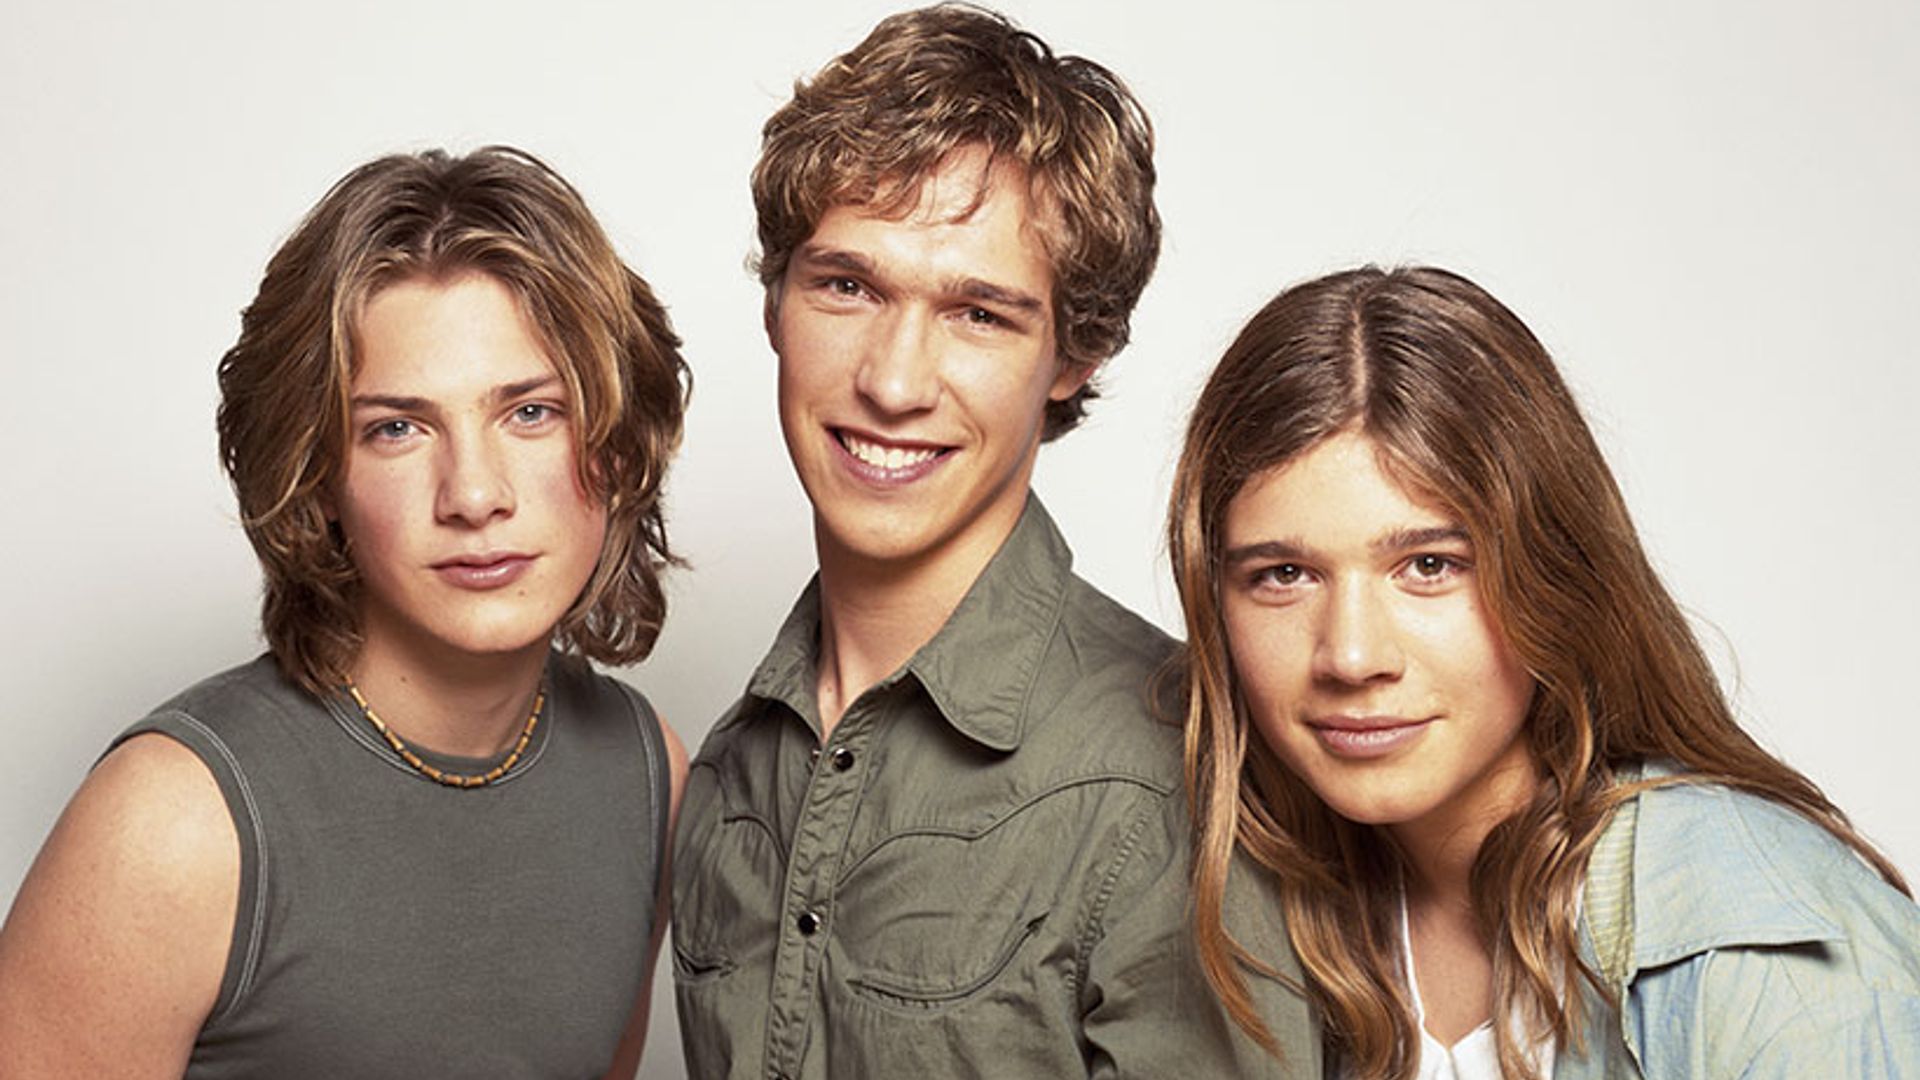 WATCH: Nineties heartthrobs Hanson team up with their kids in new music video